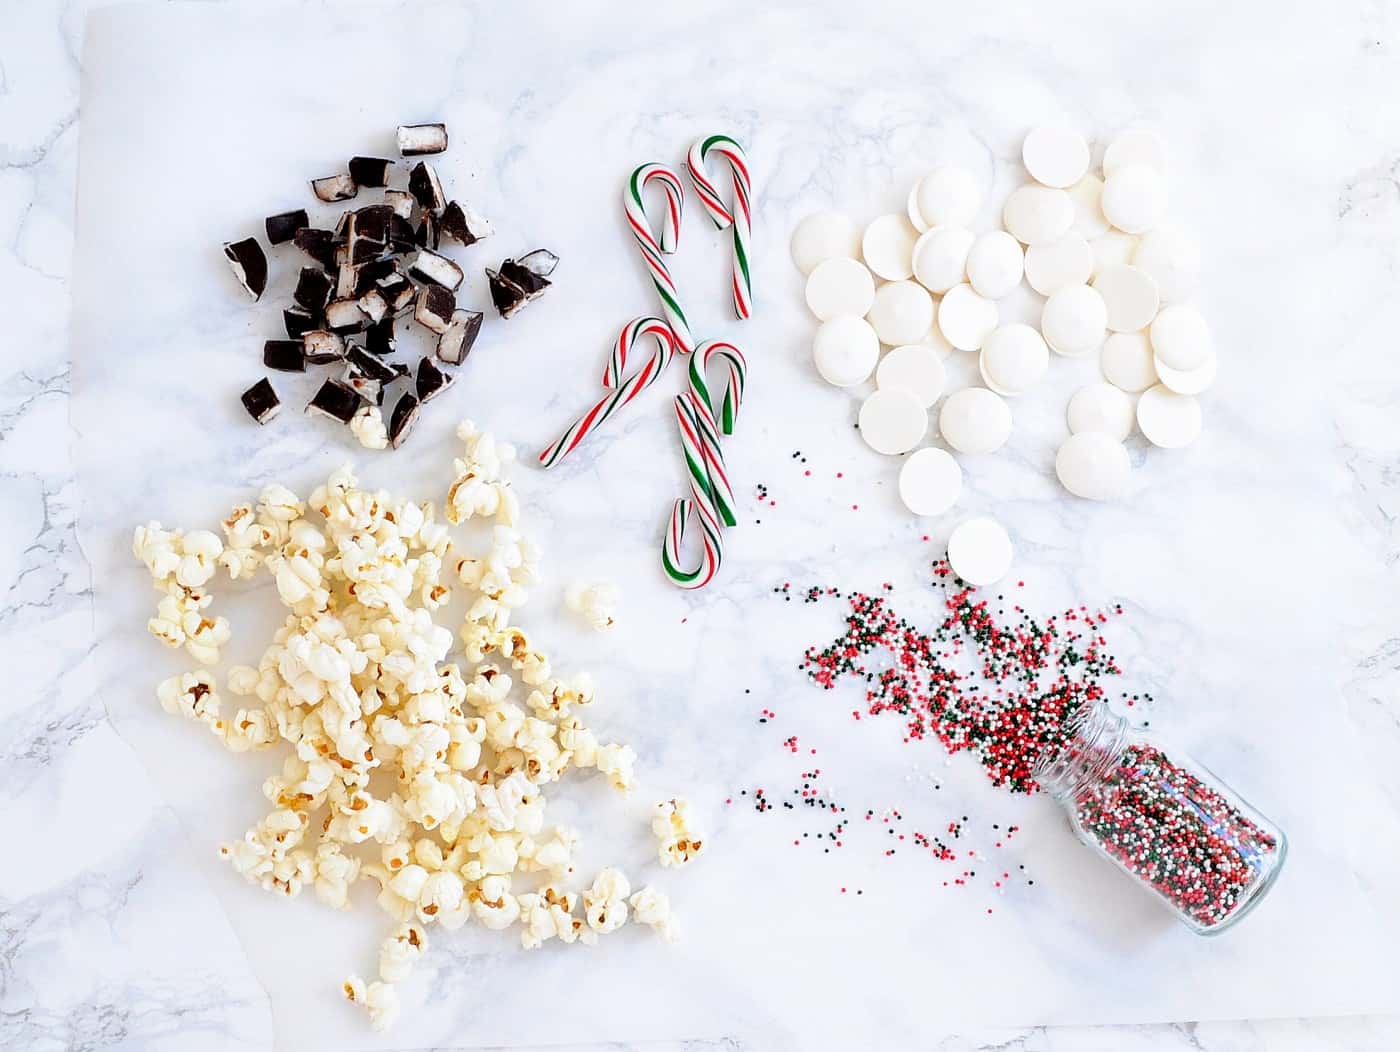 Peppermint patties, candy canes, popcorn, candy melts, and red and green sprinkles